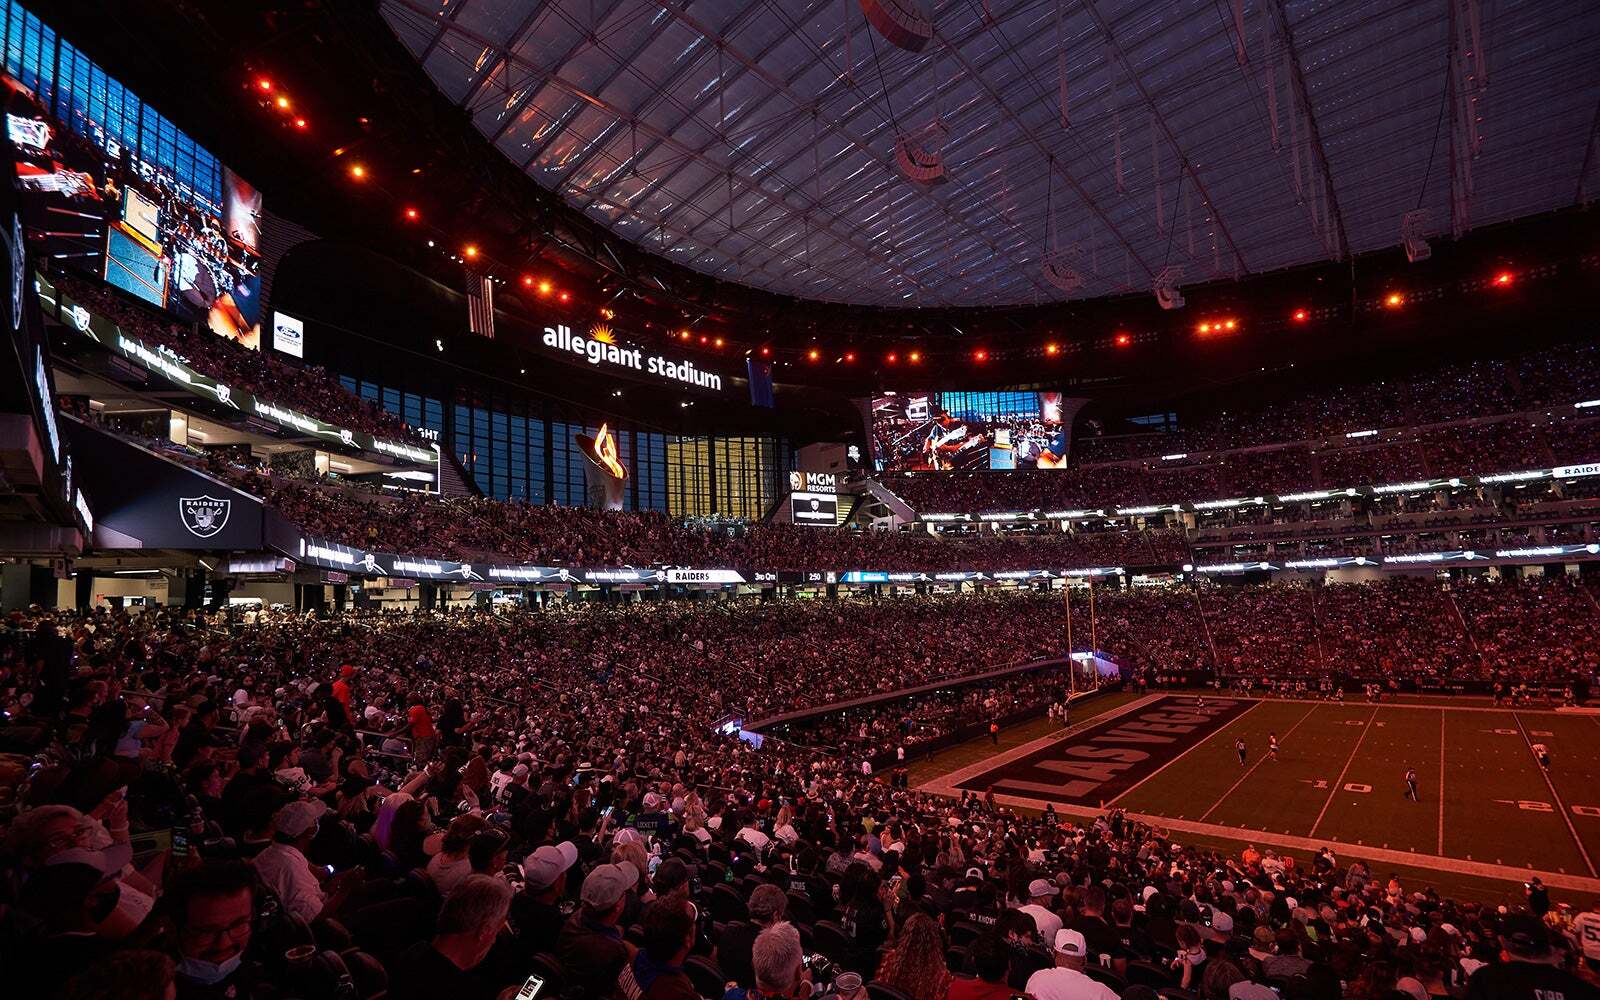 T-Mobile improved data speeds inside Allegiant Stadium in time for the Super Bowl - T-Mobile increases its peak 5G data download speeds 10x for fans attending the Super Bowl